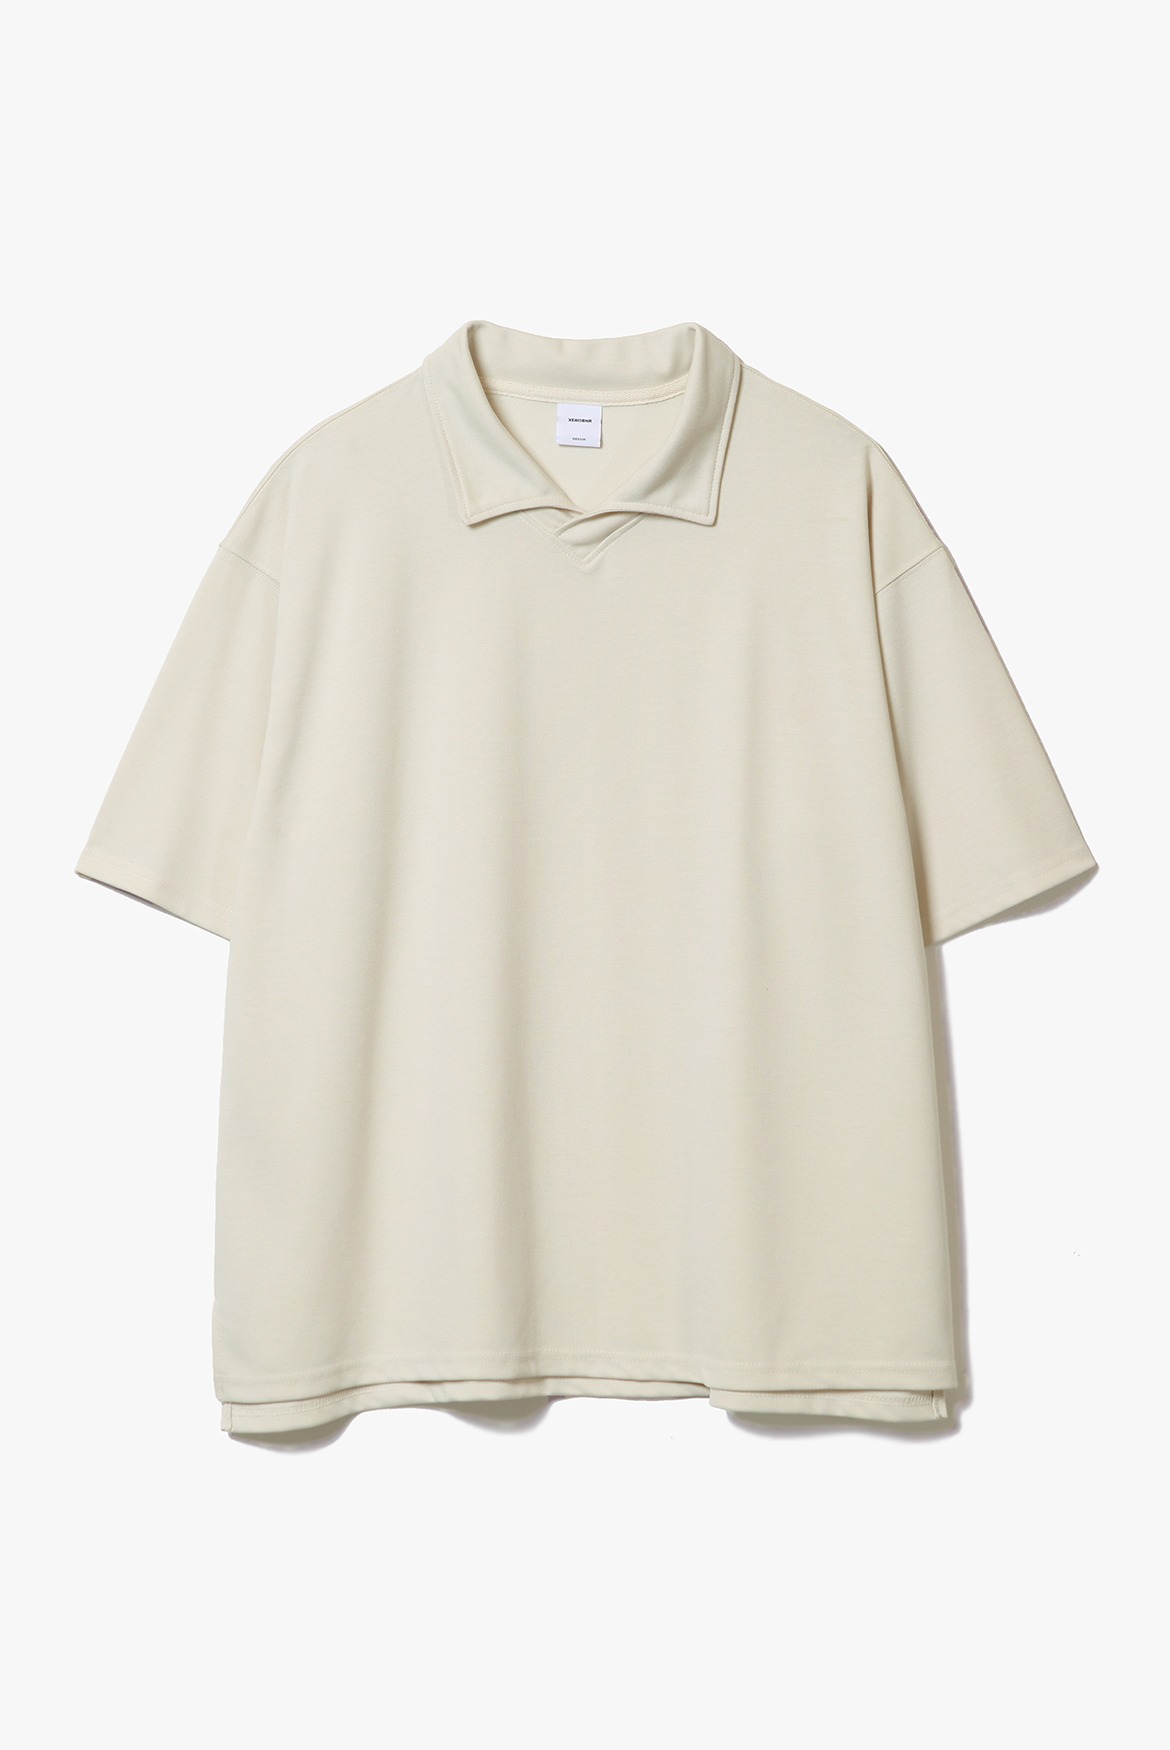 V-Neck Stand Collar T-Shirts [Ivory]